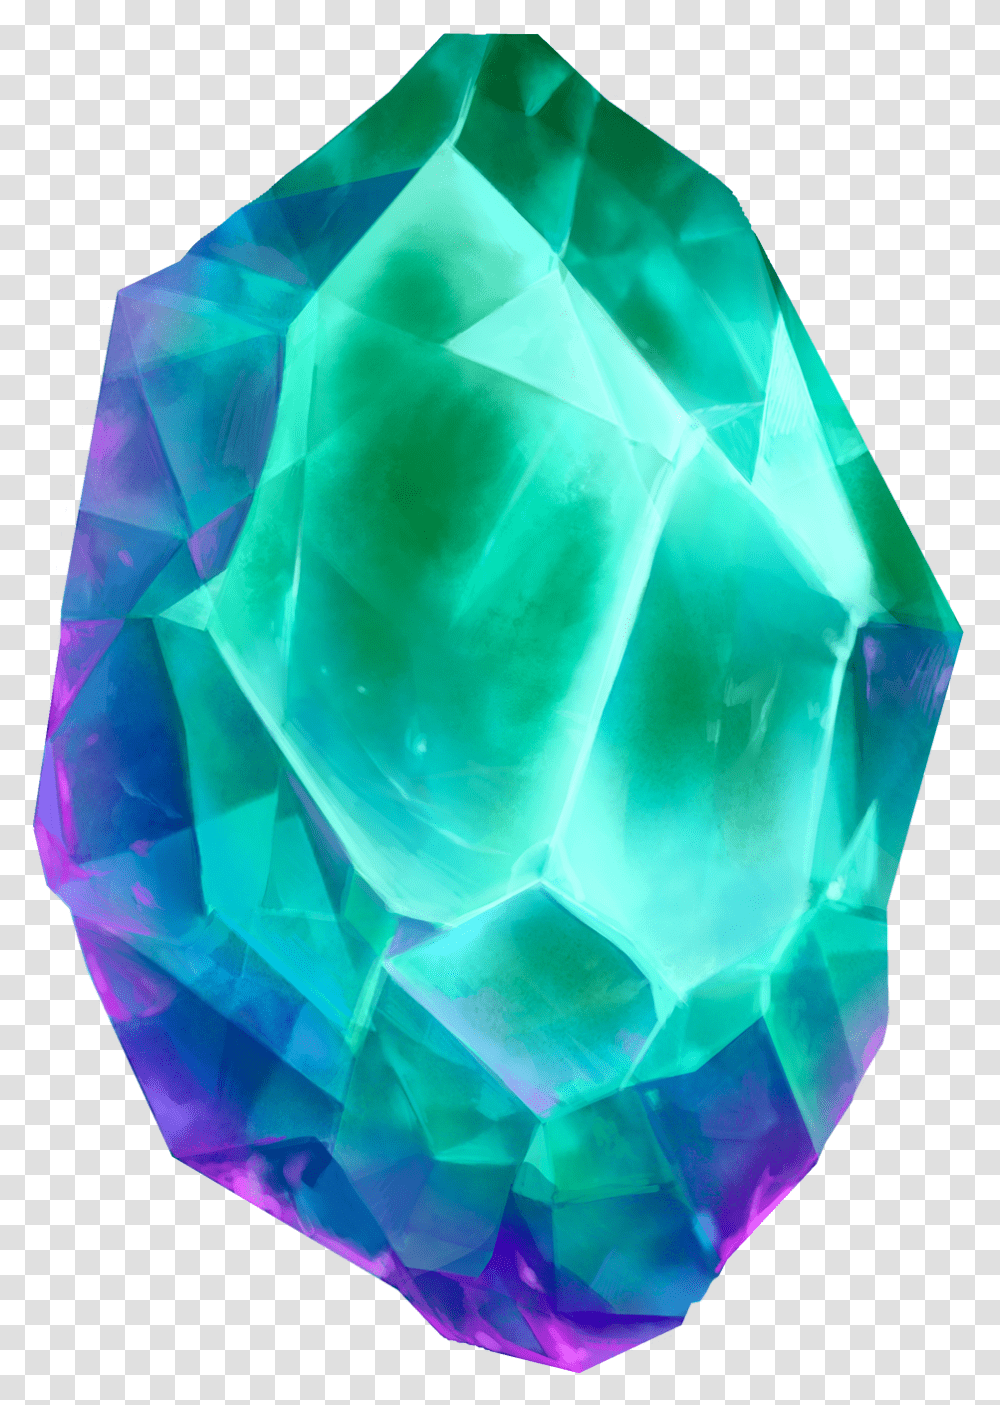 Lol Odyssey Gem Download League Of Legends Gemstones, Crystal, Mineral, Jewelry, Accessories Transparent Png